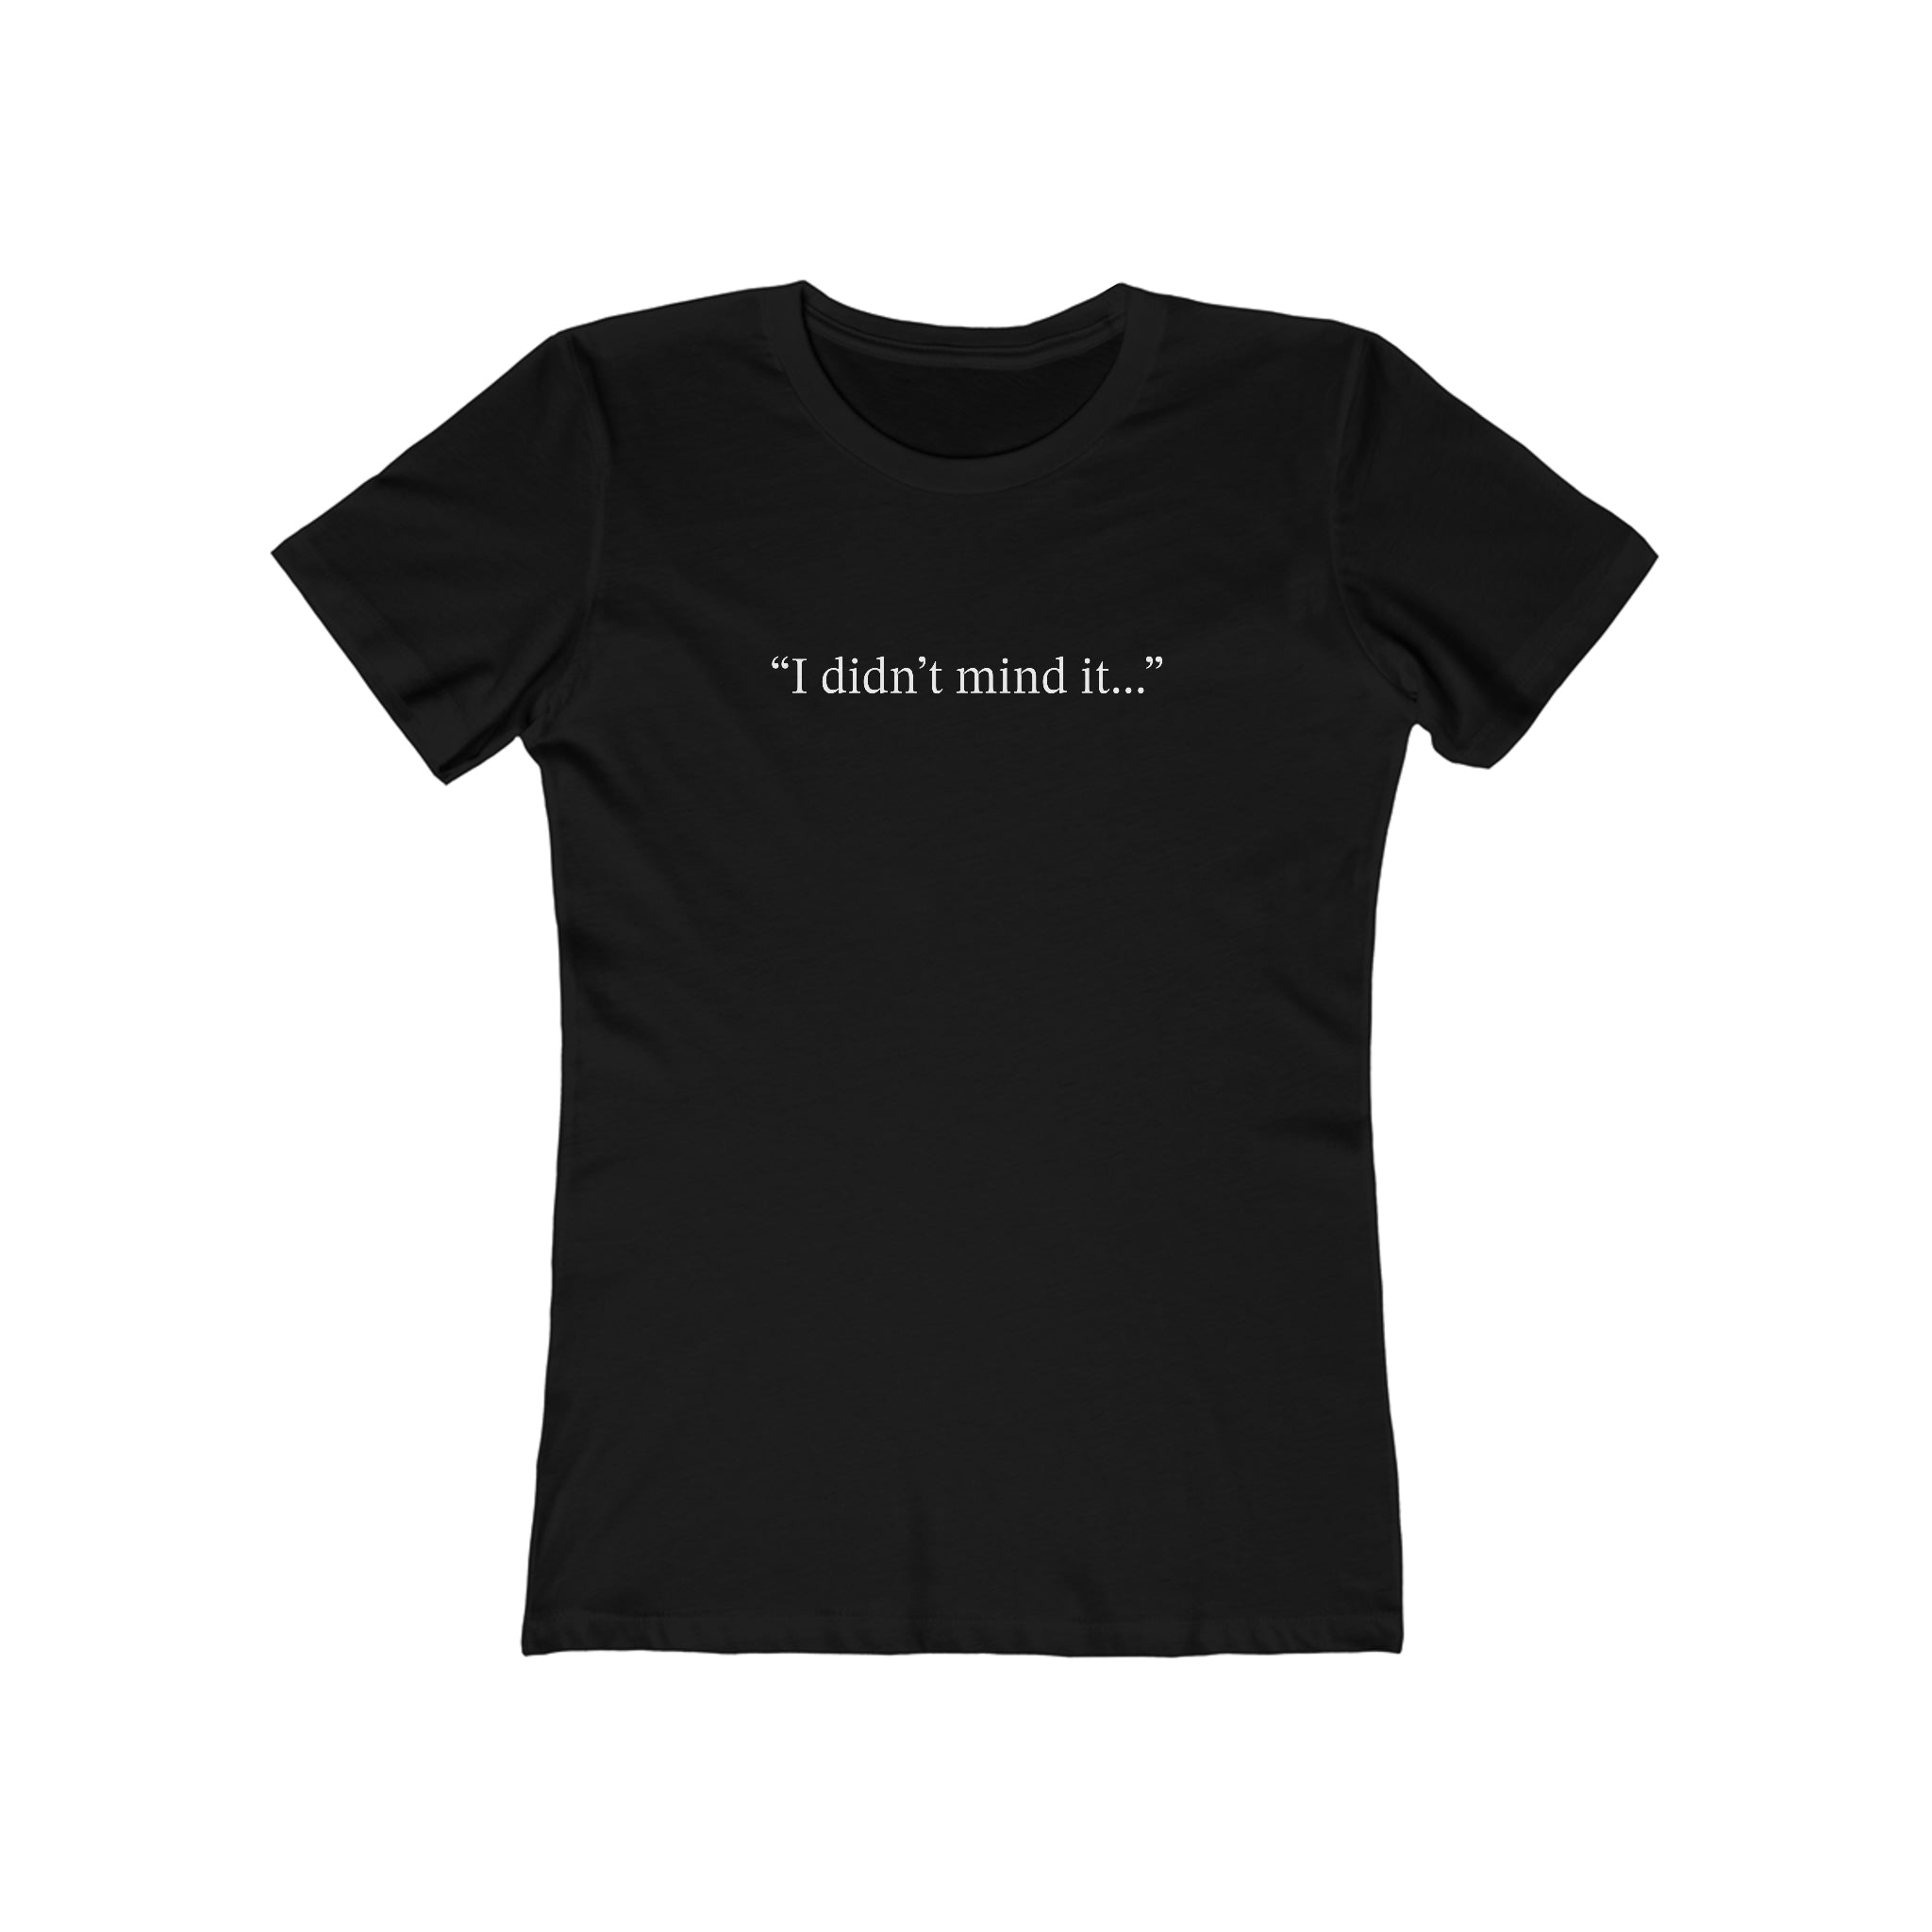 Witches Movie Coven - "I Didn't Mind It" Women's Tee